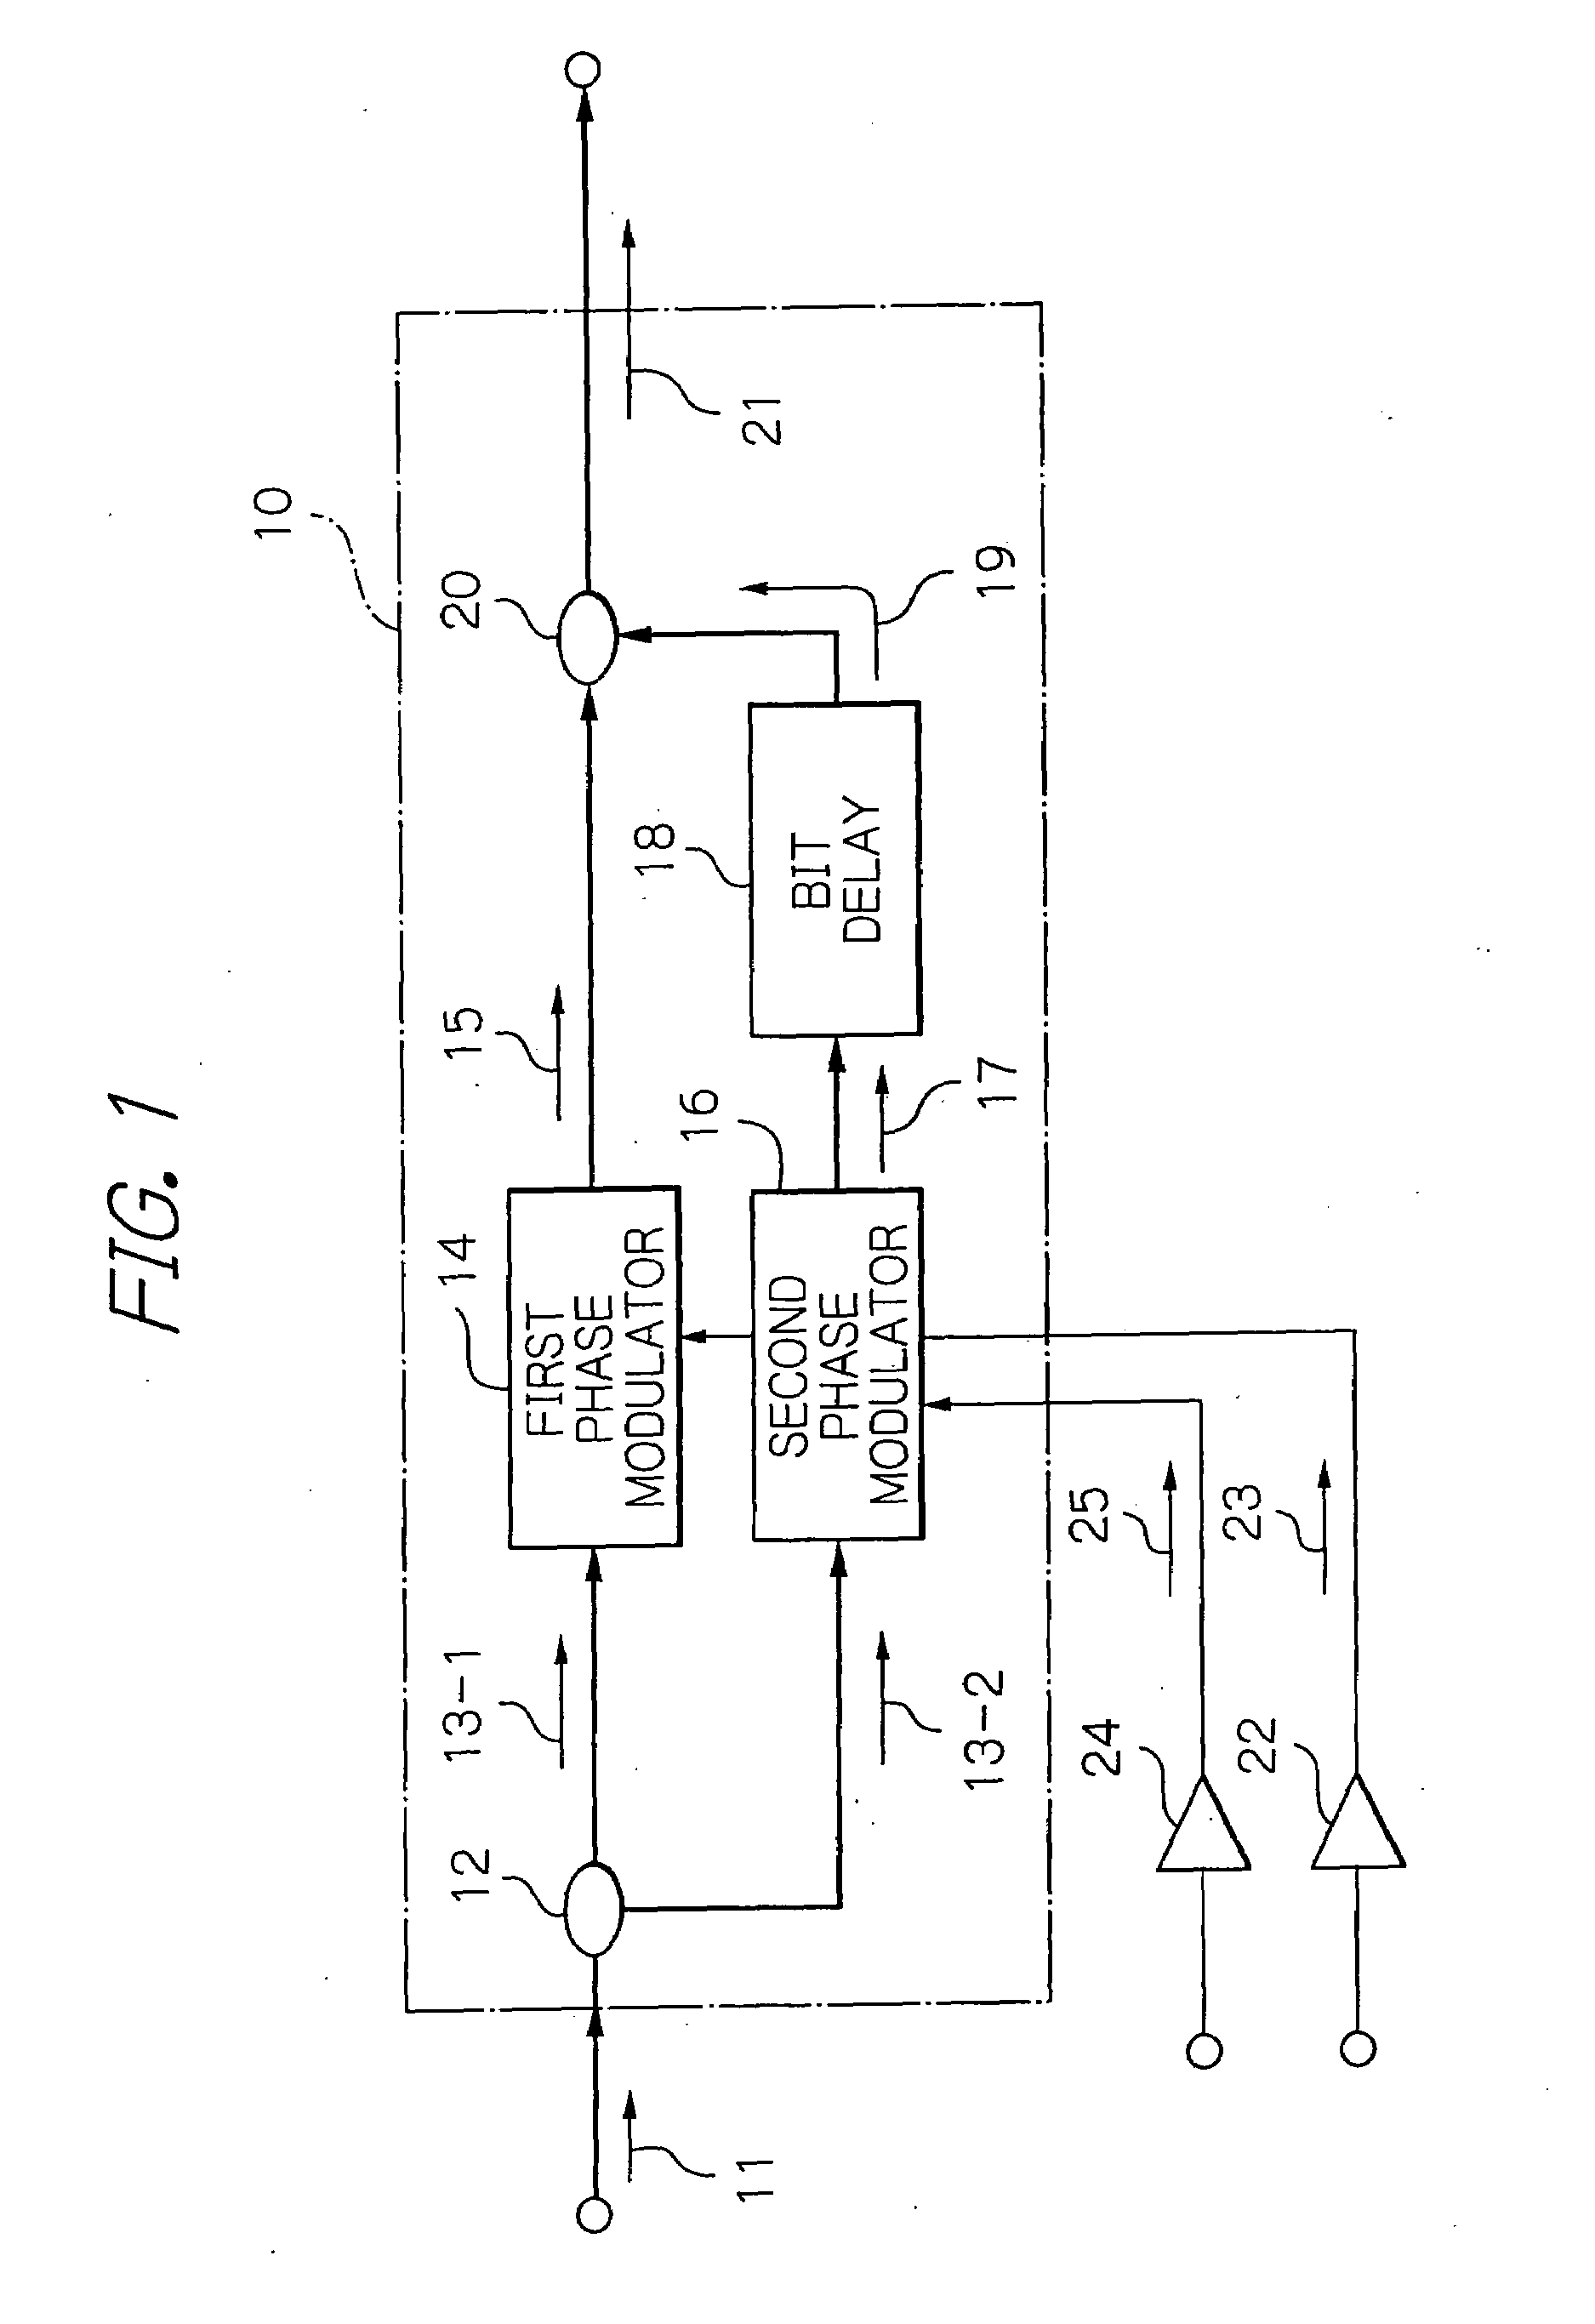 OTDM-DPSK signal generator capable of detecting an optical carrier phase difference between optical pulses